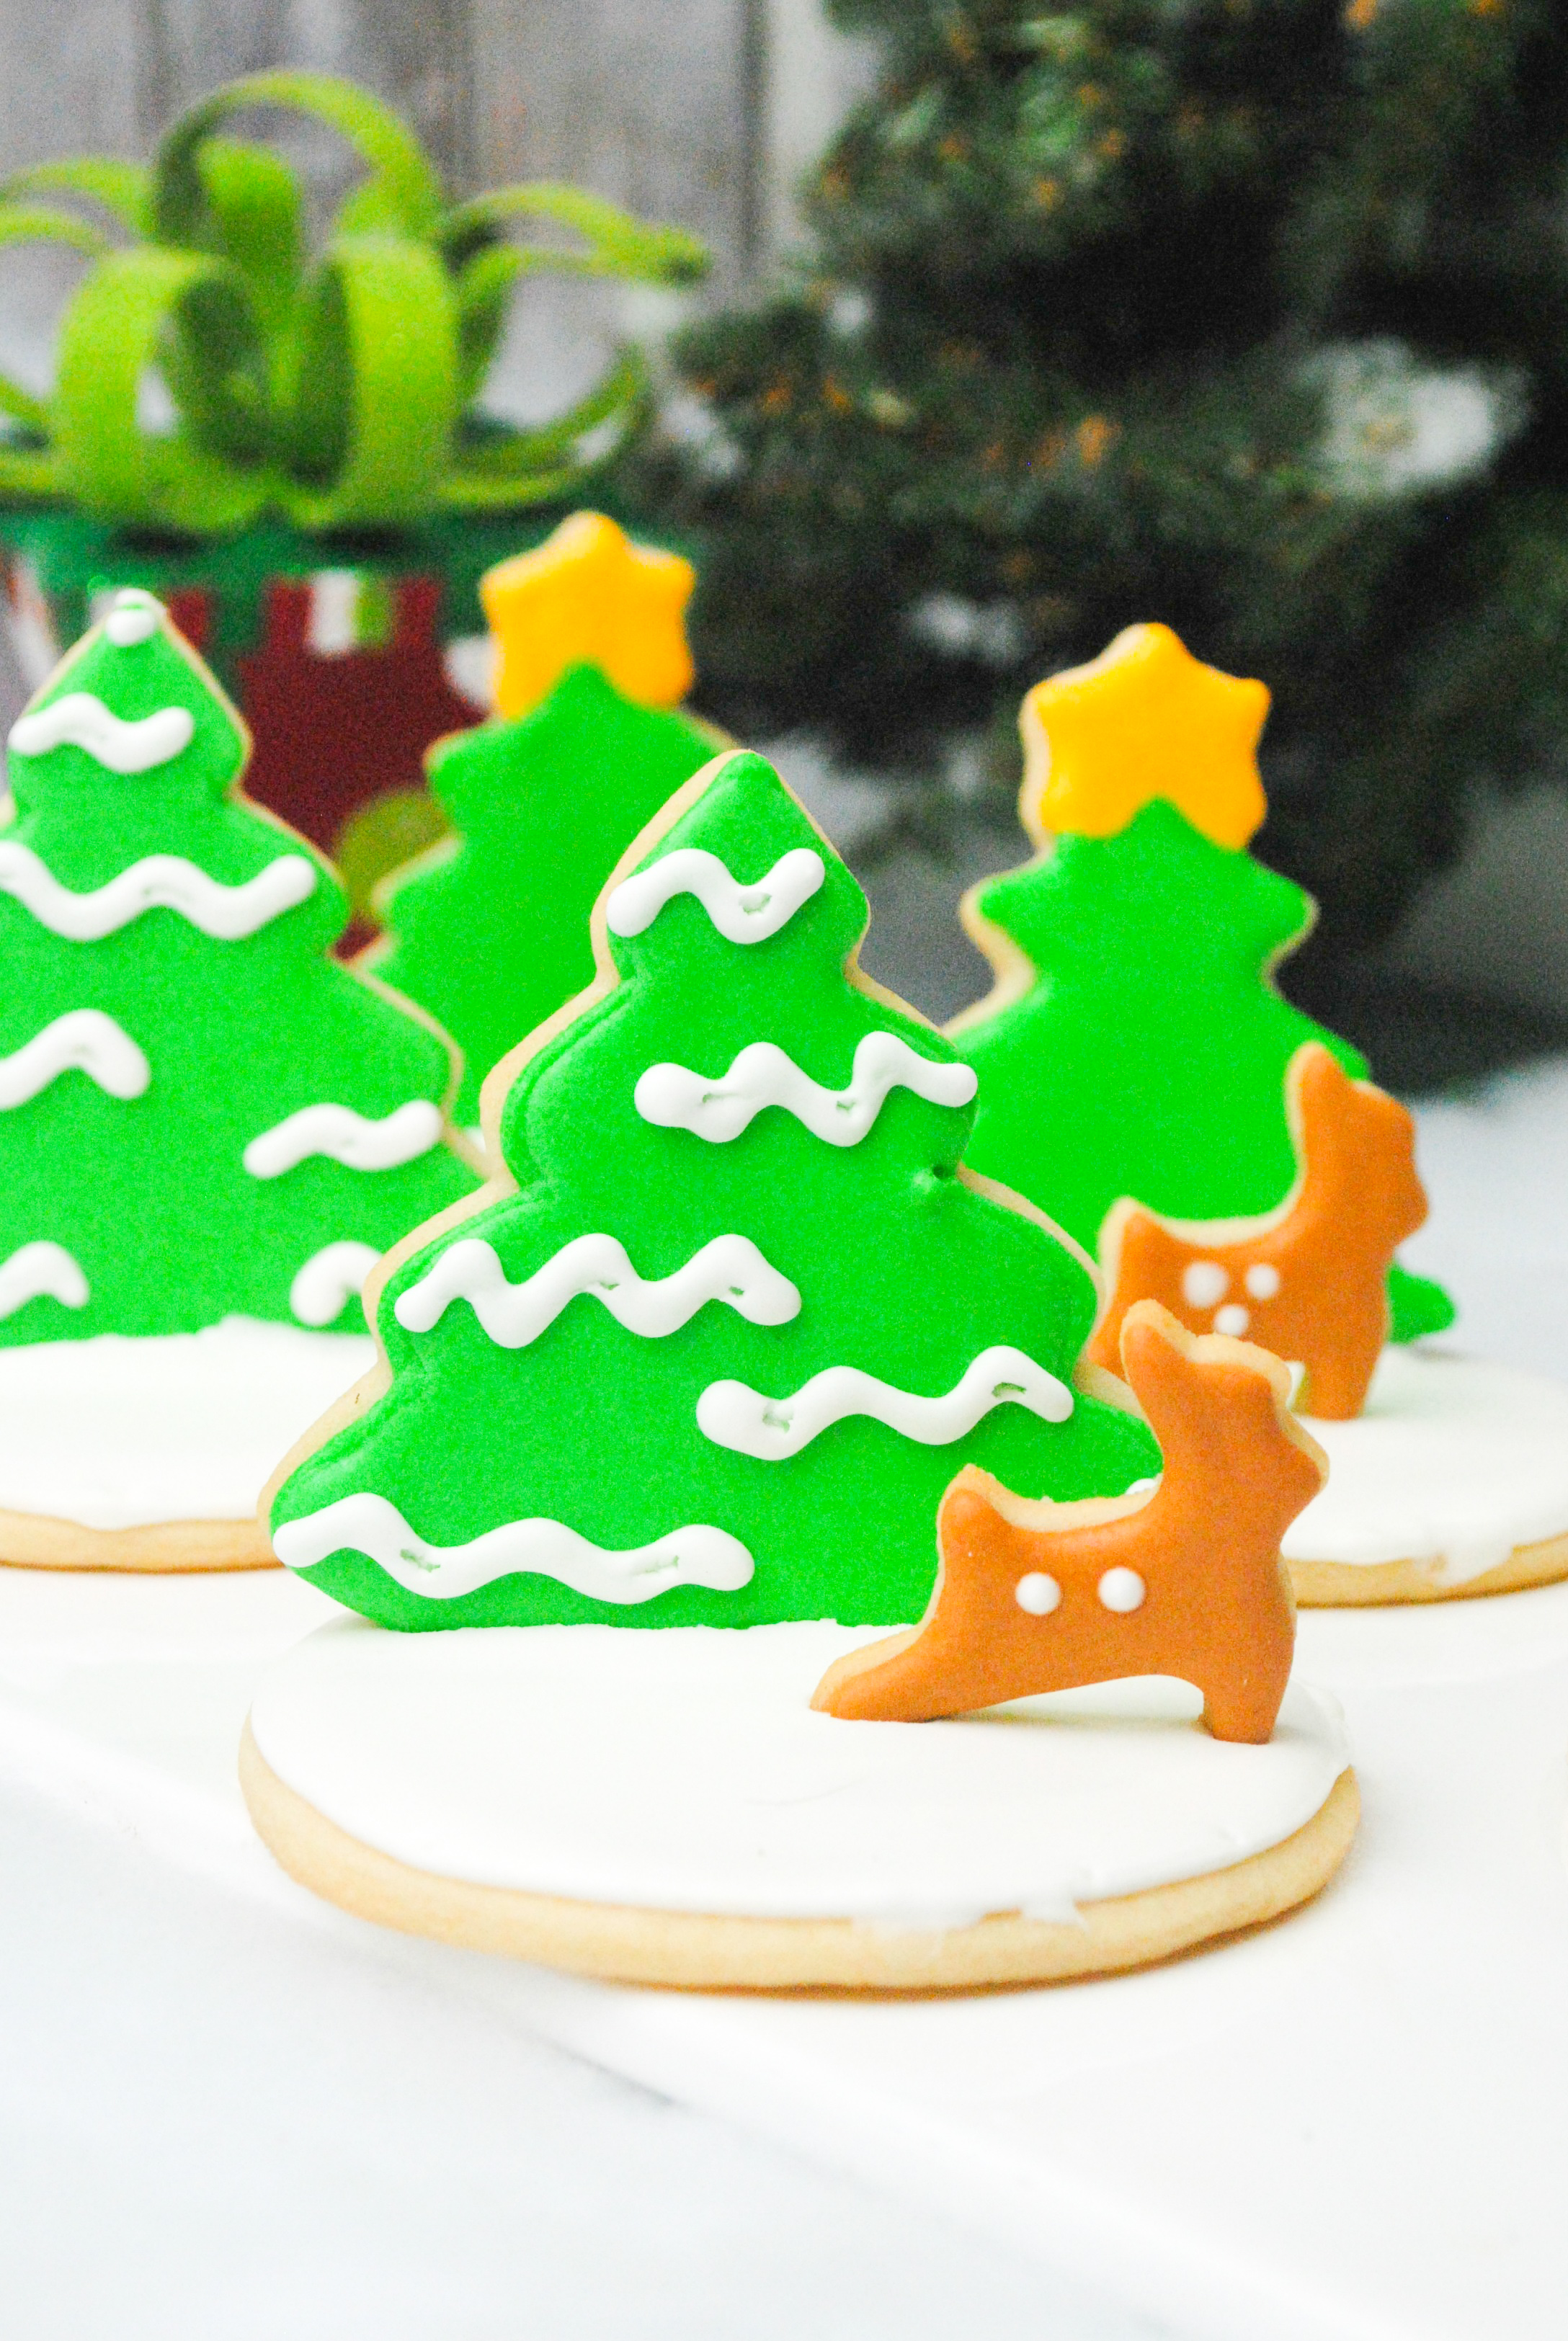 This is our Recipe for the Best Christmas Cookies Ever! From the flavors to the adorable designs, these are sure to be the talk of the dessert table! #Christmascookies #holidaycookies